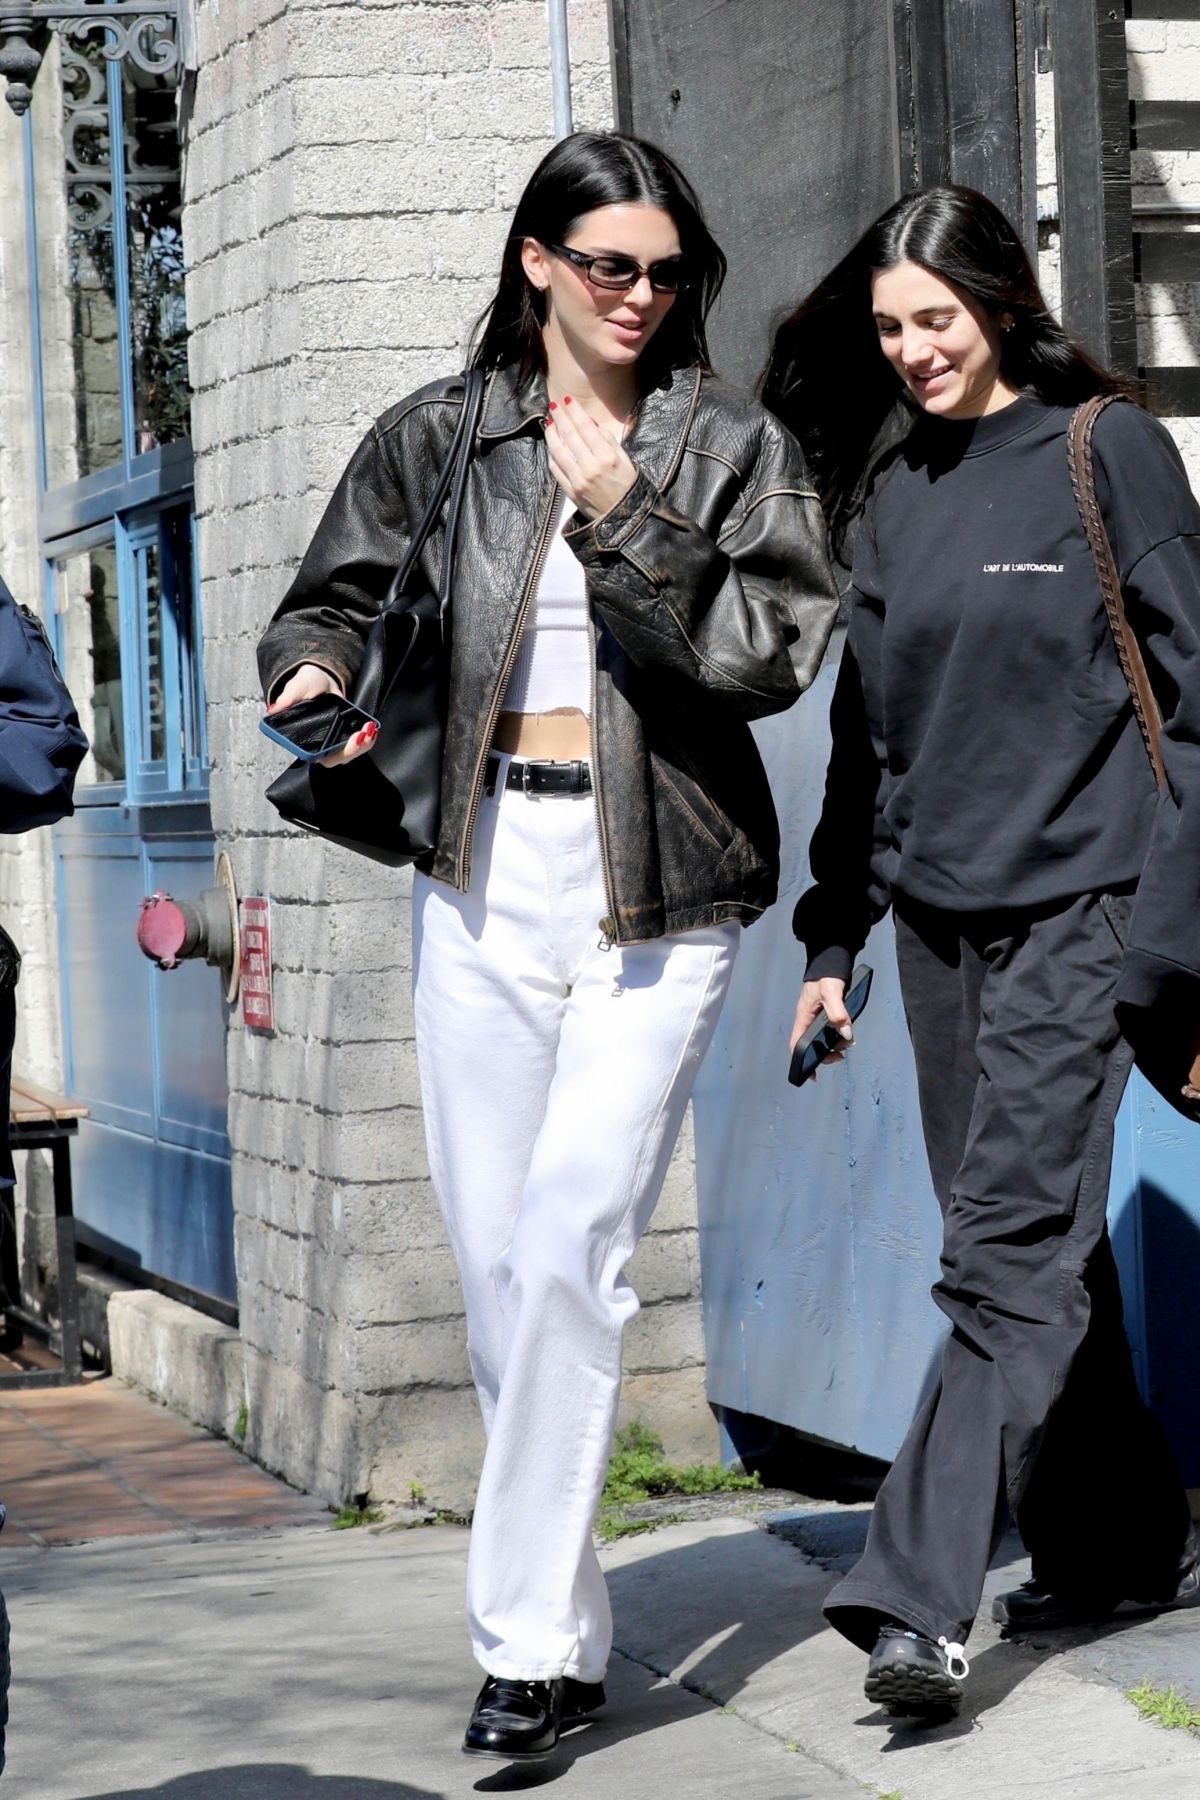 Kendall Jenner West Hollywood February 19, 2023 – Star Style